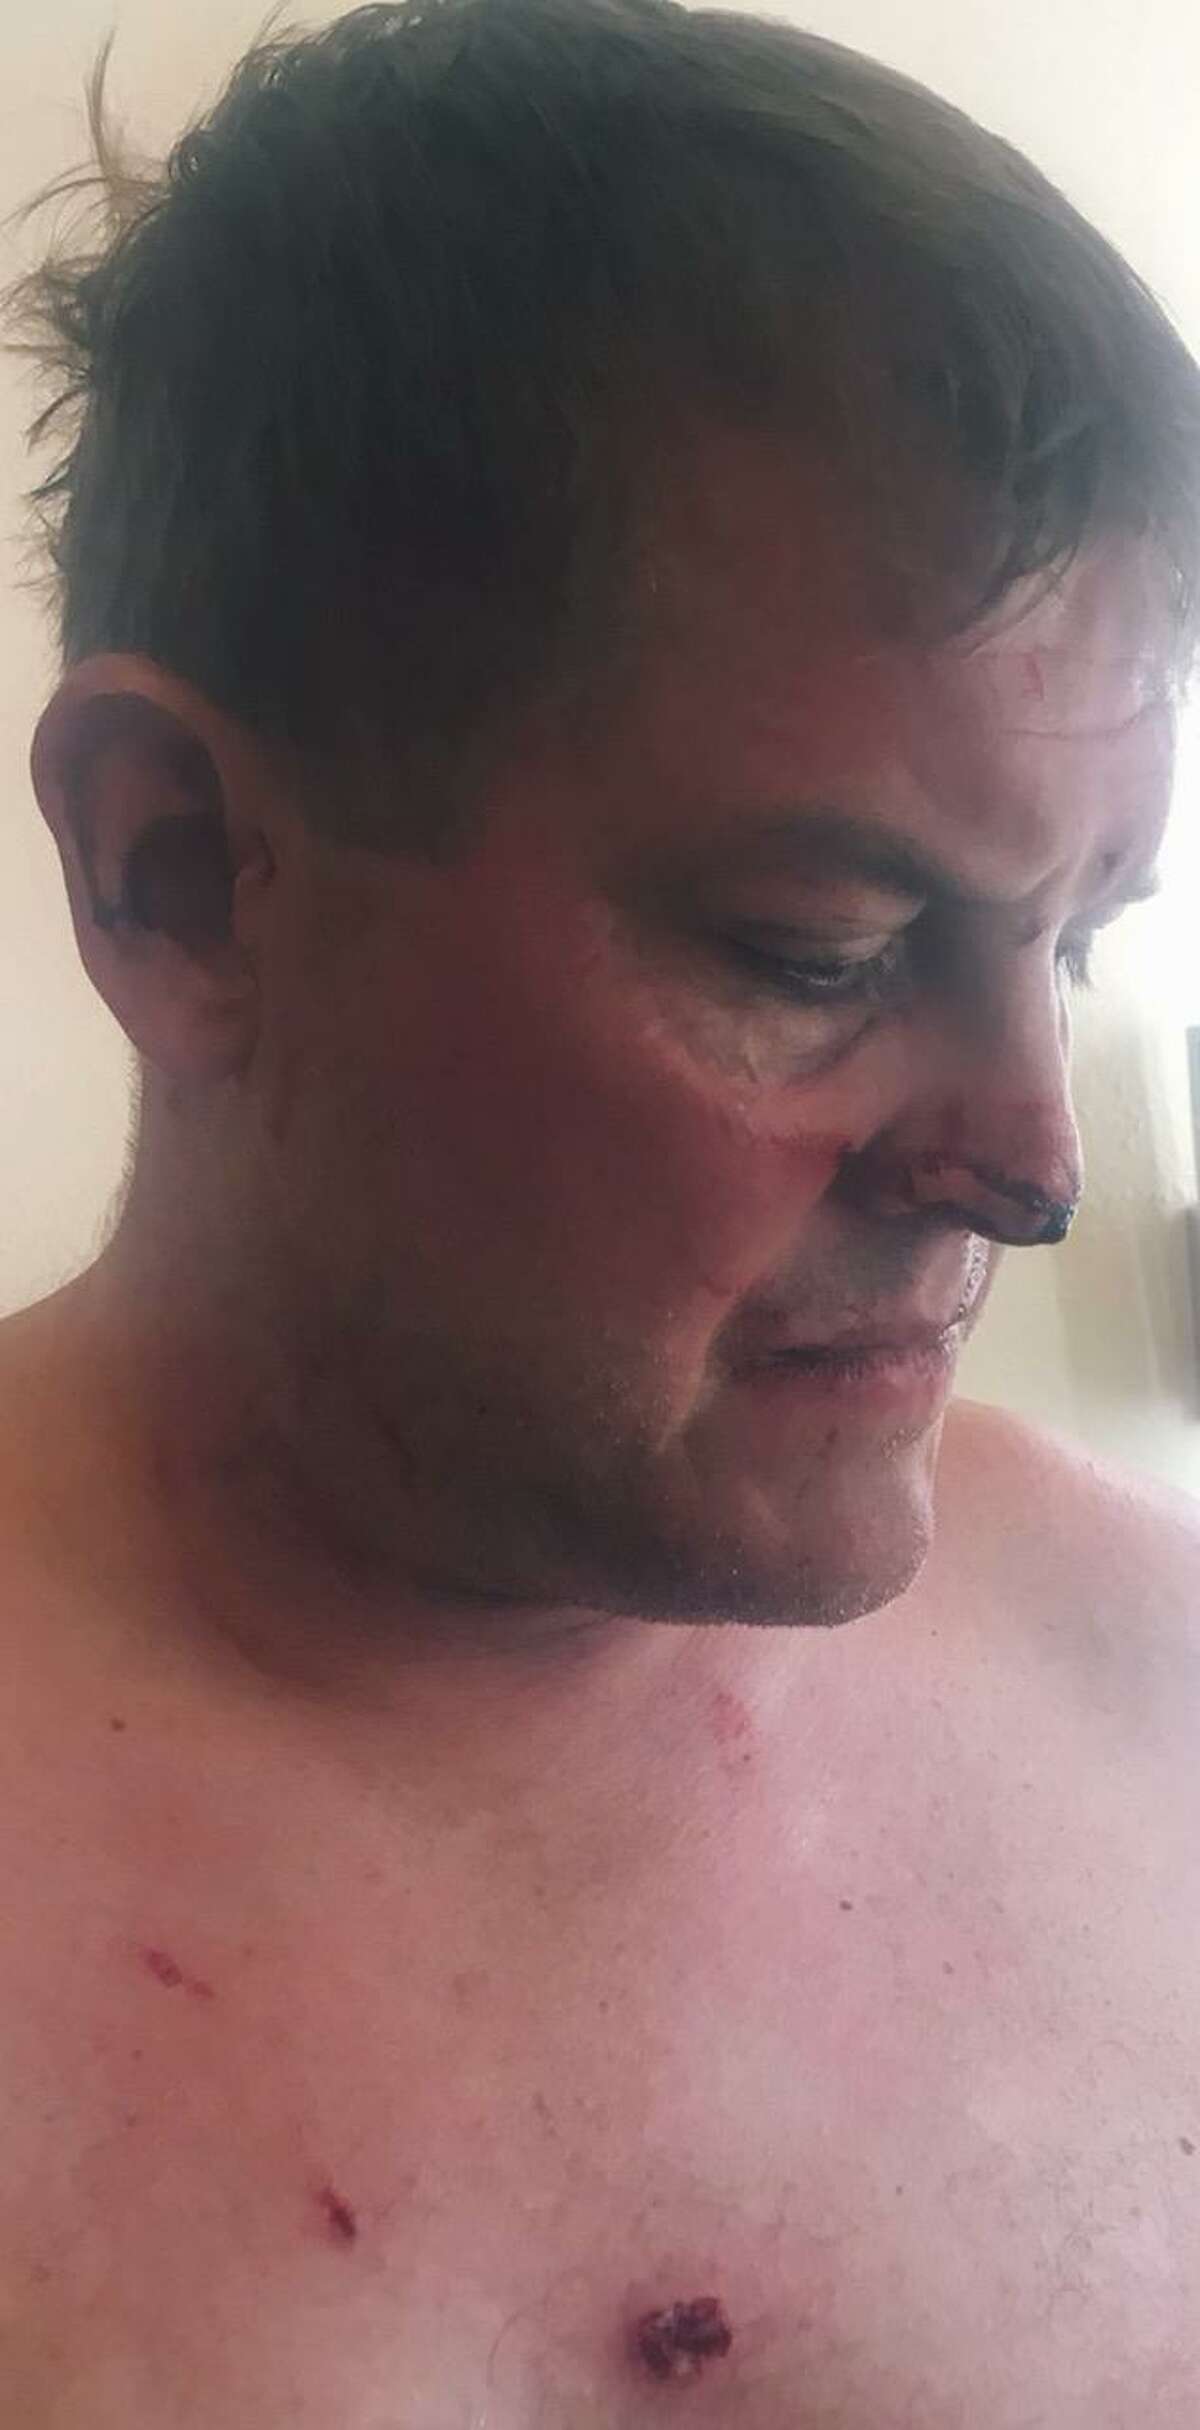 Gavin Scott Hapgood suffered bruises and bite marks in the struggle with hotel worker Kenny Mitchel, according to Hapgood’s family.